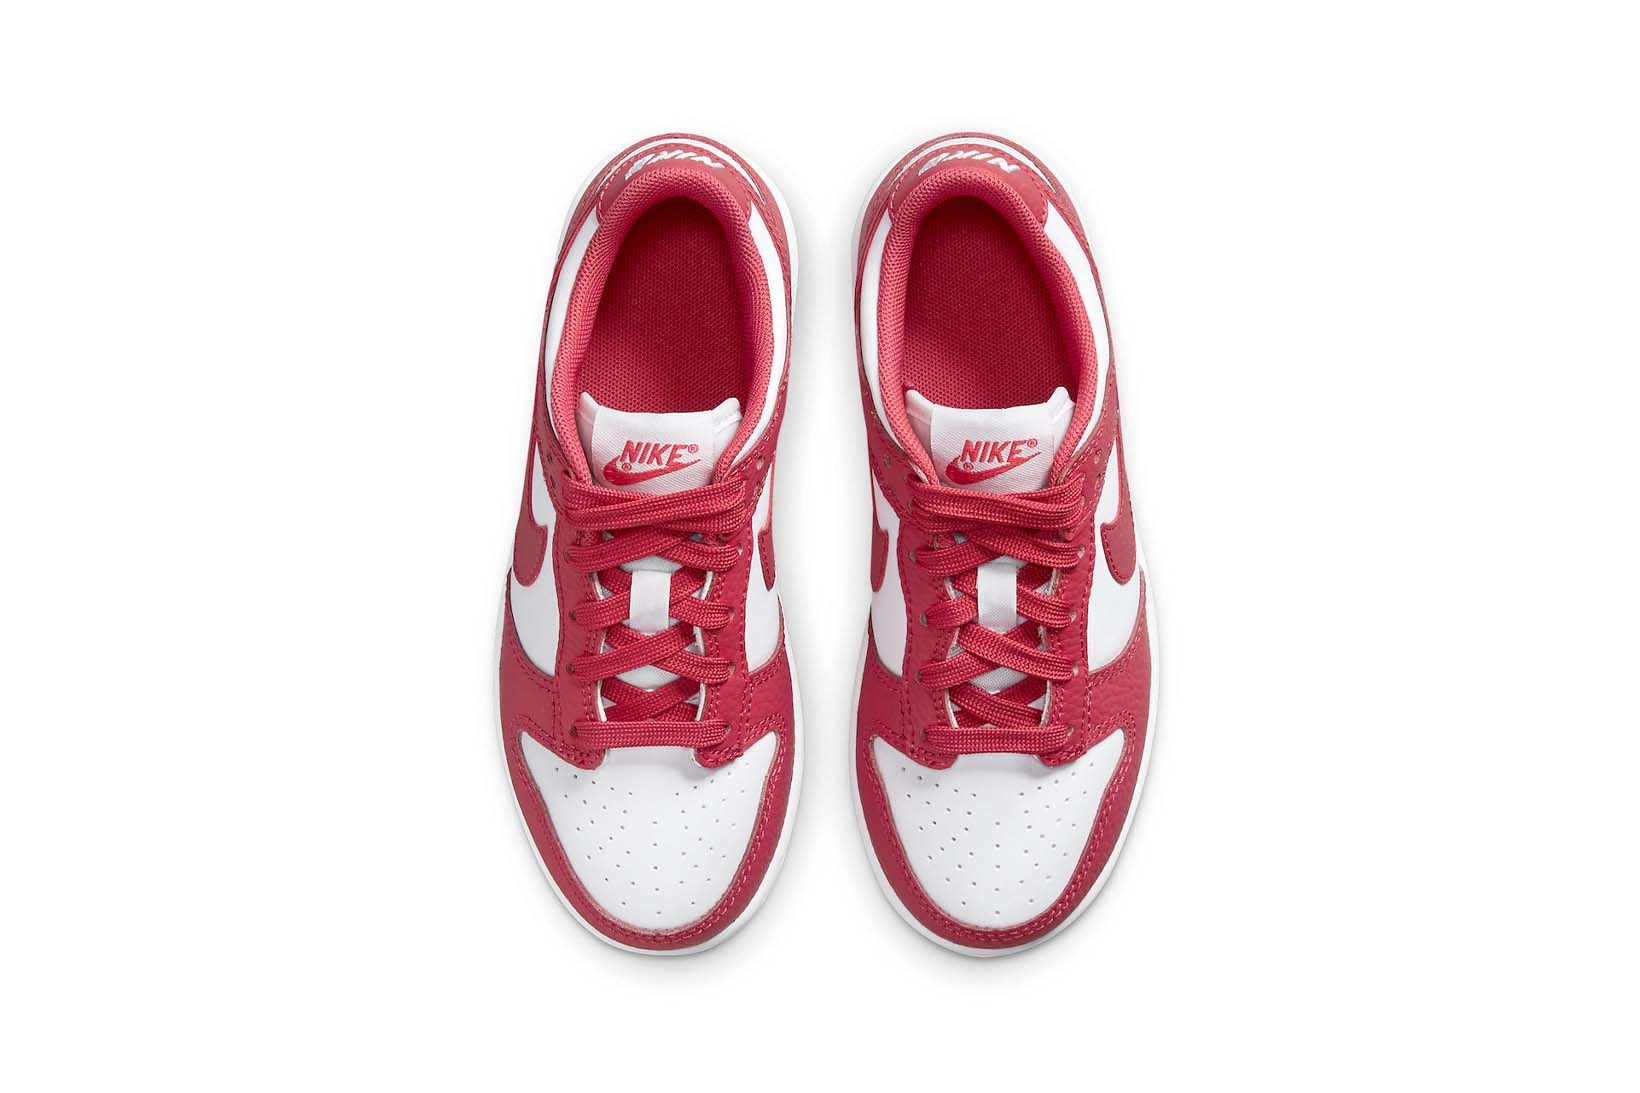 Nike Dunk Low GS TD PS Gypsy Rose Pink White Price Release Date